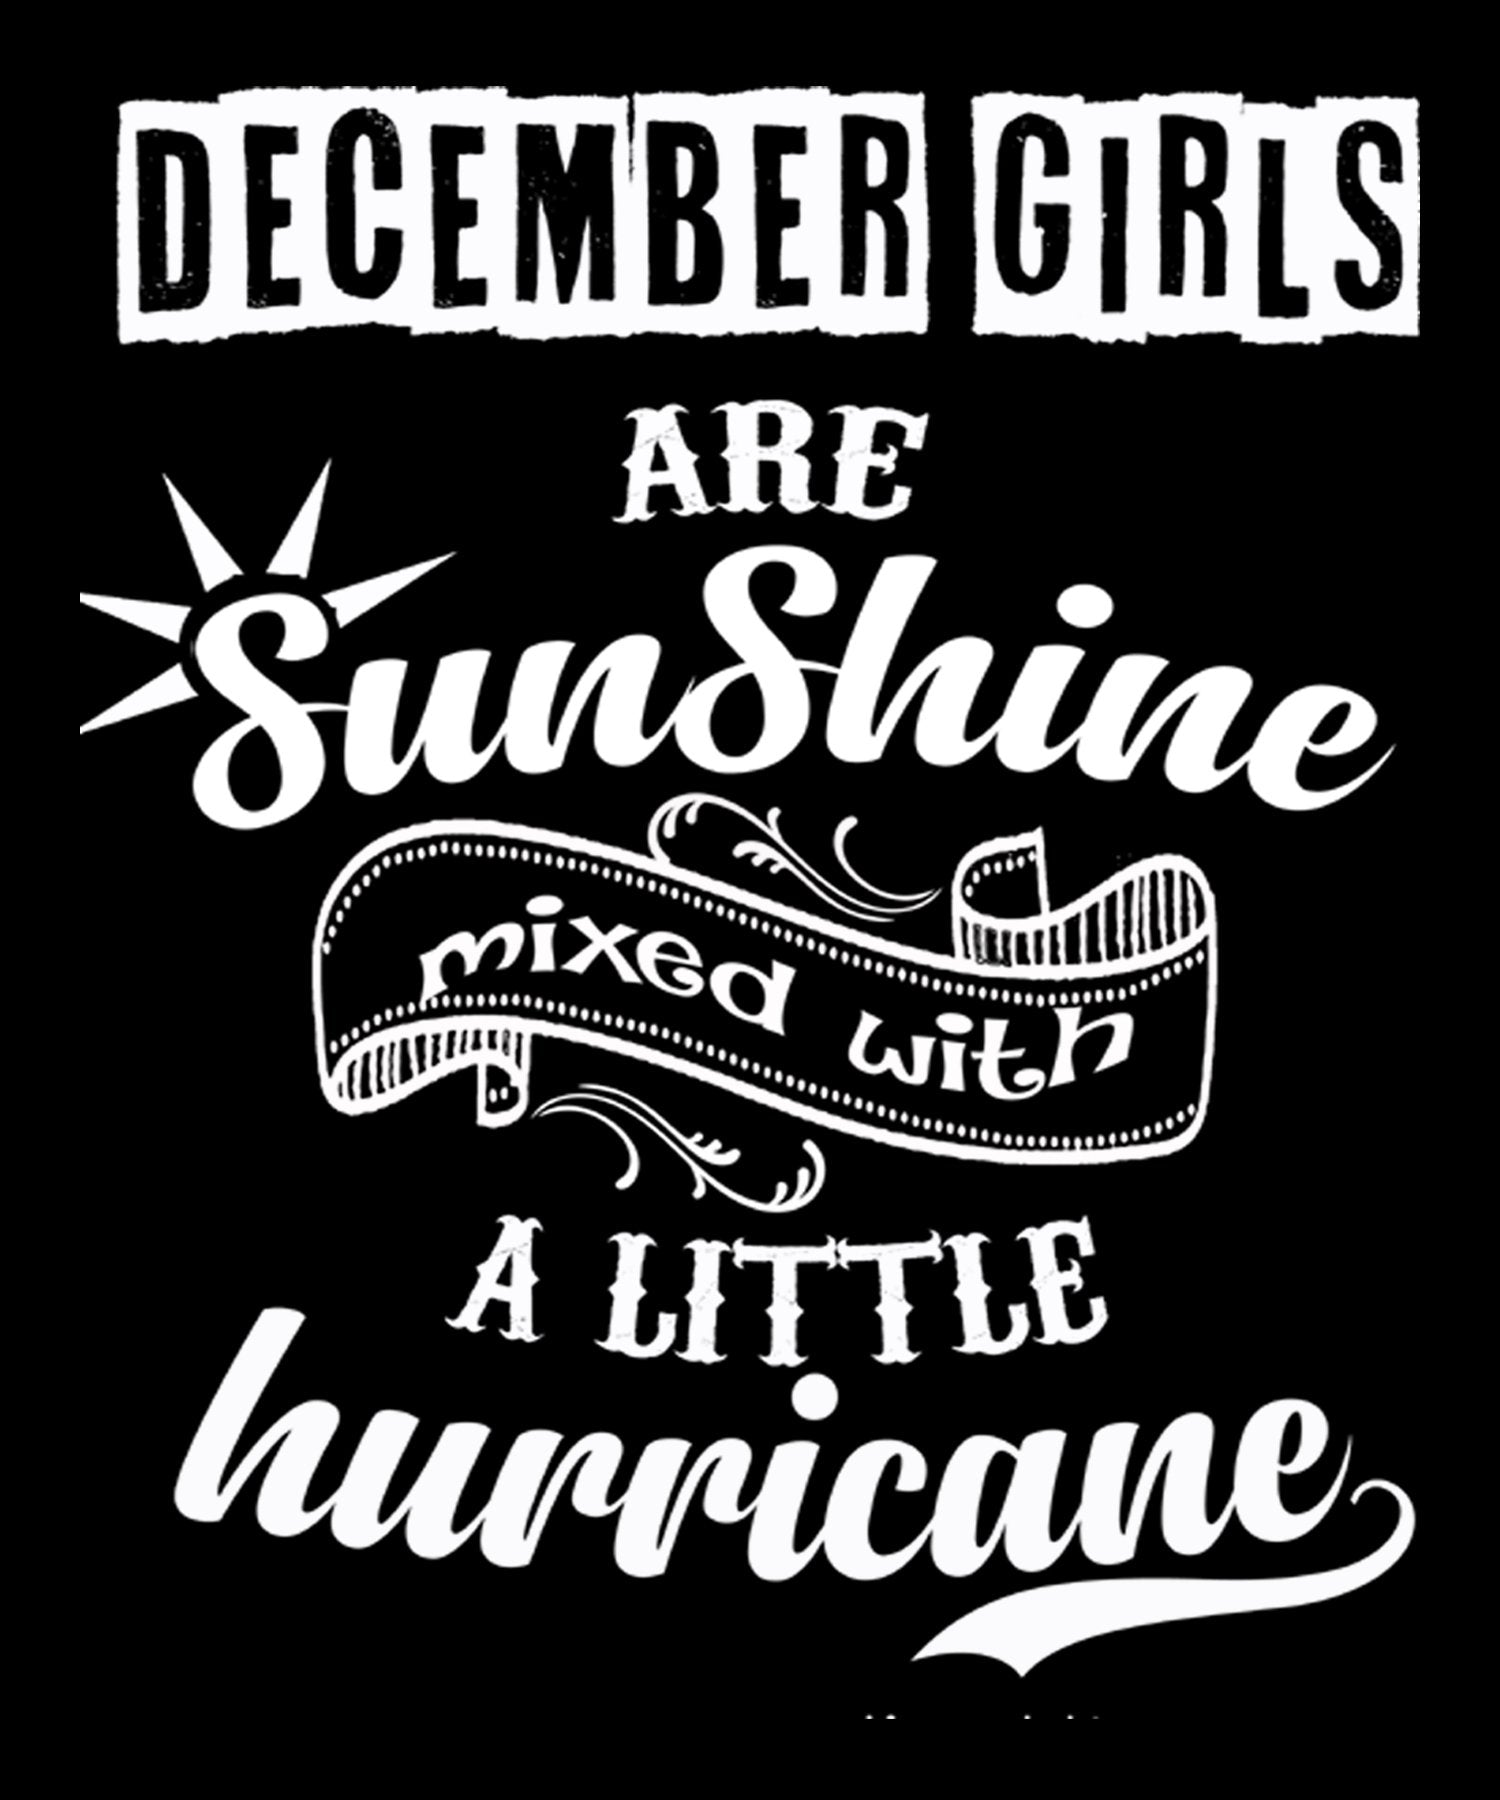 "December Girls Are Sunshine Mixed With Hurricane"